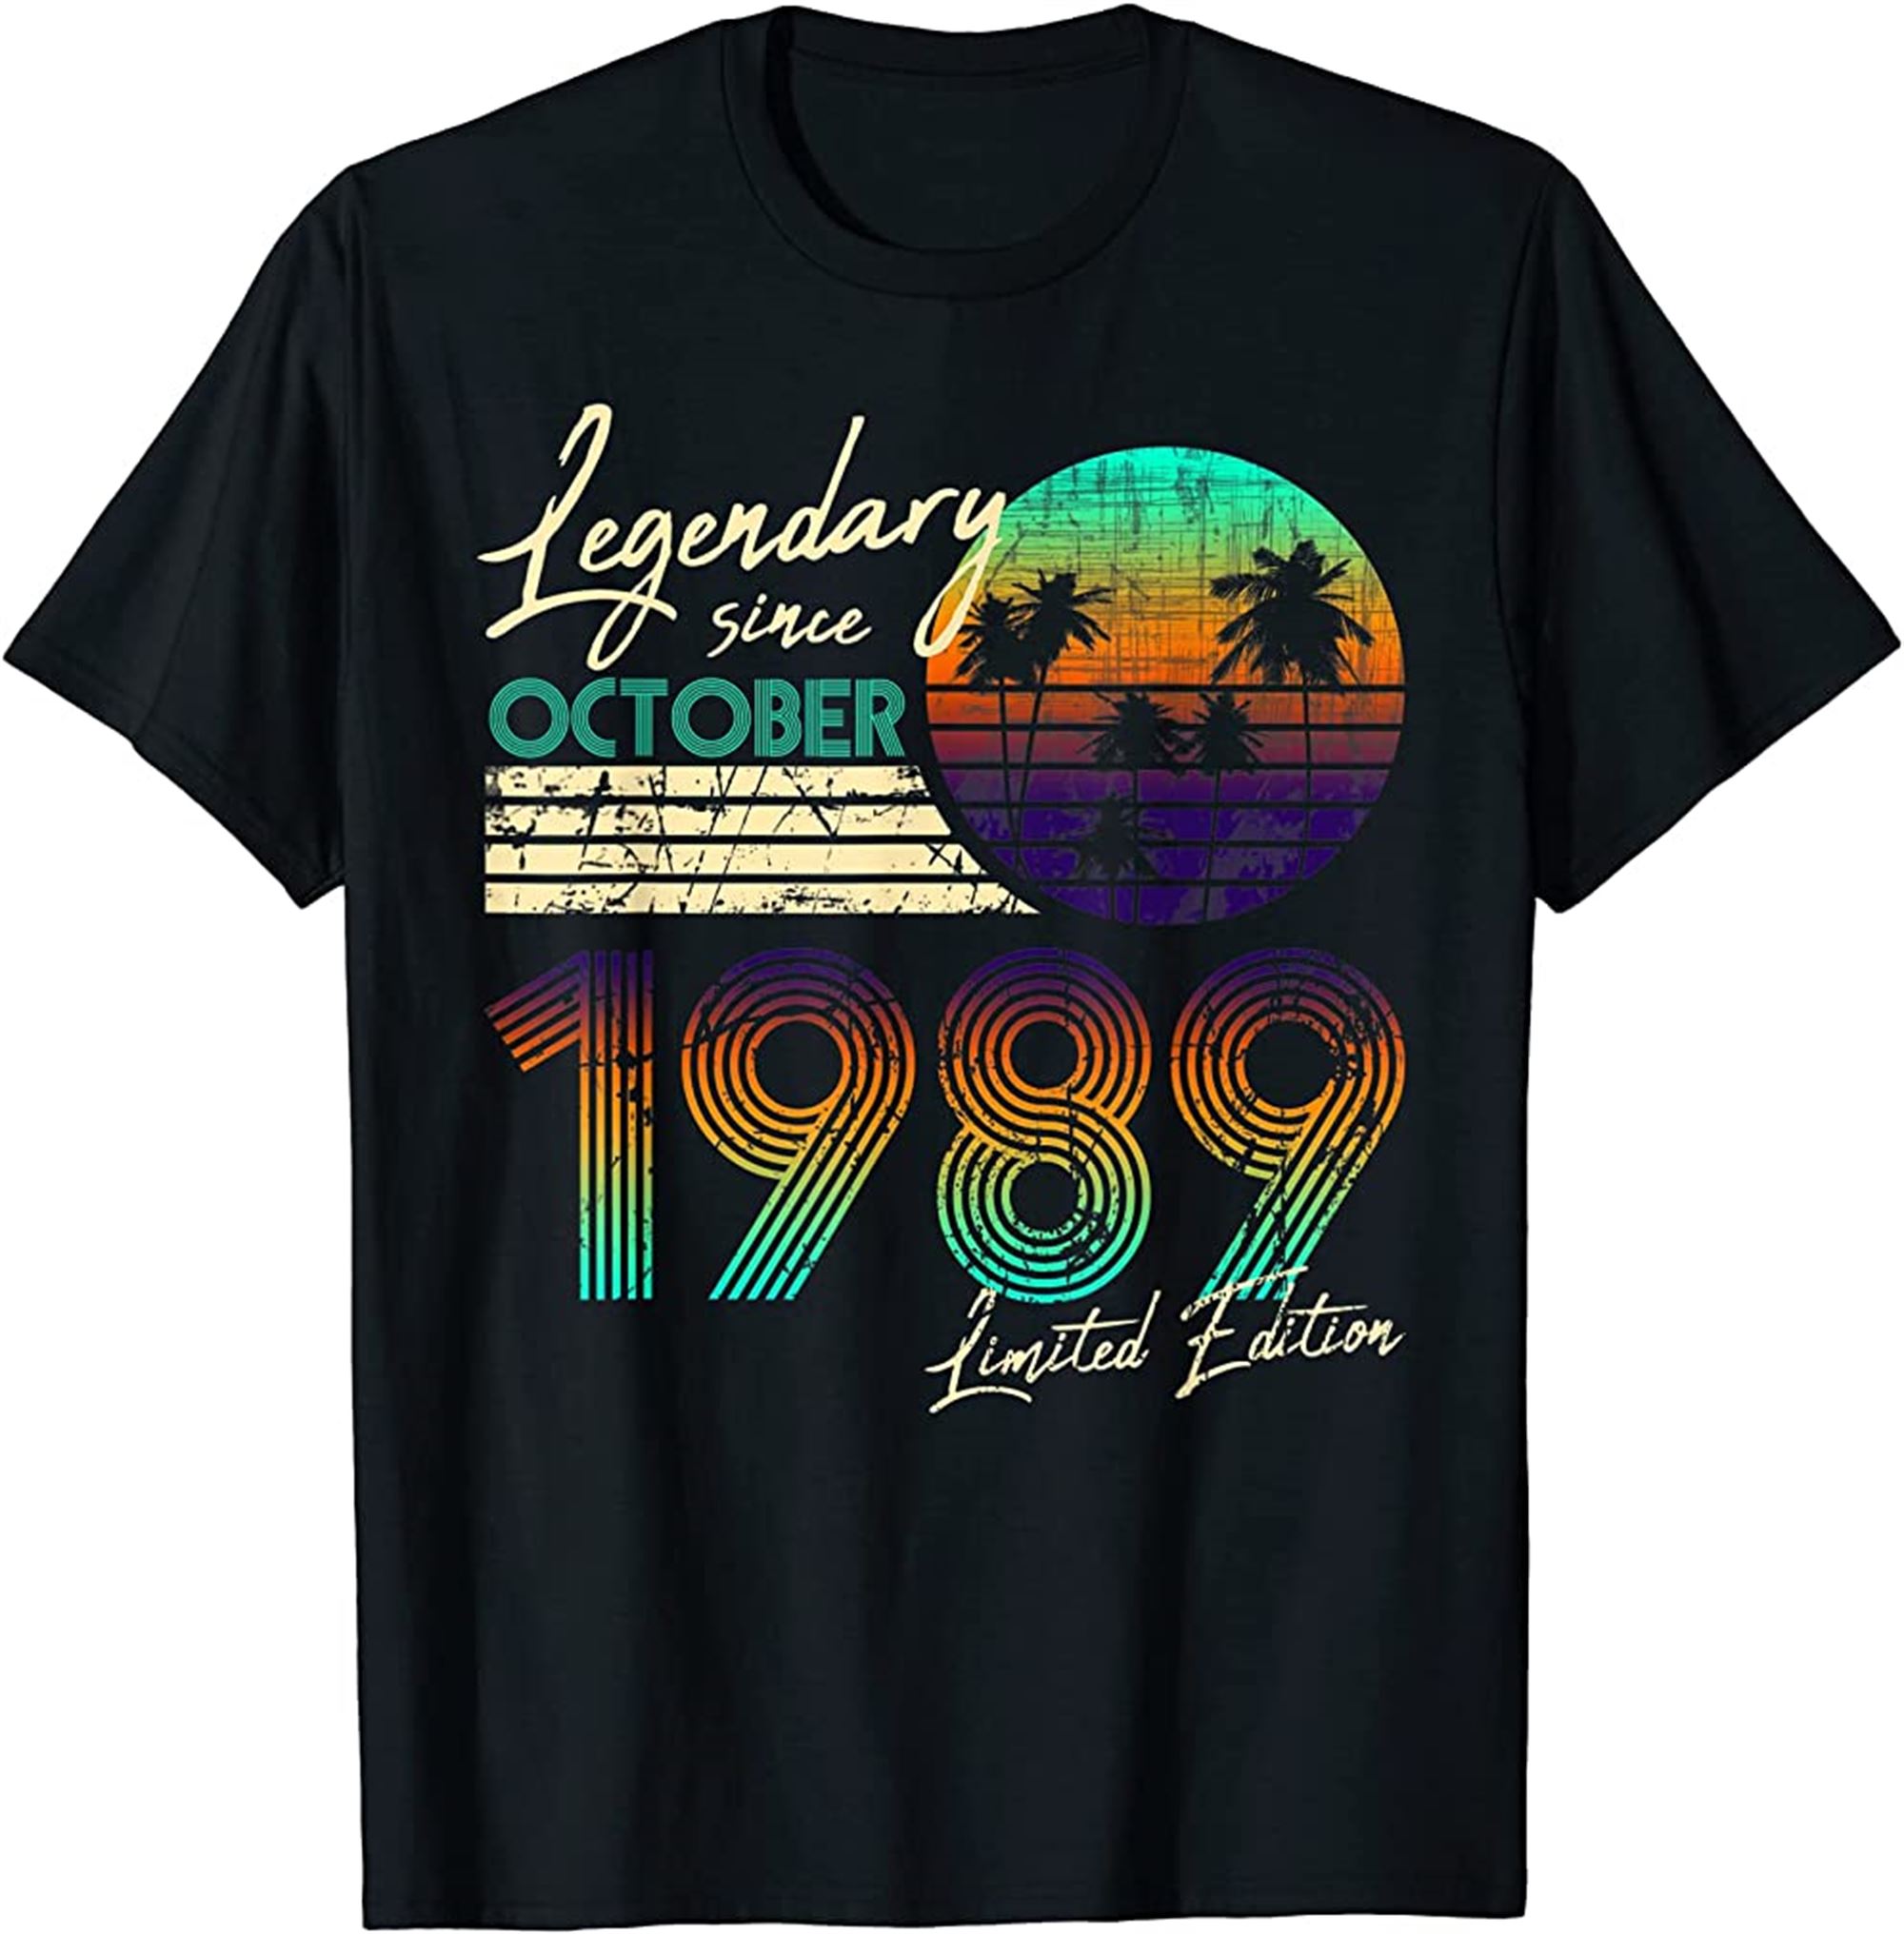 Birthday Legendary Since October 1989 T-shirt Full Size Up To 5xl